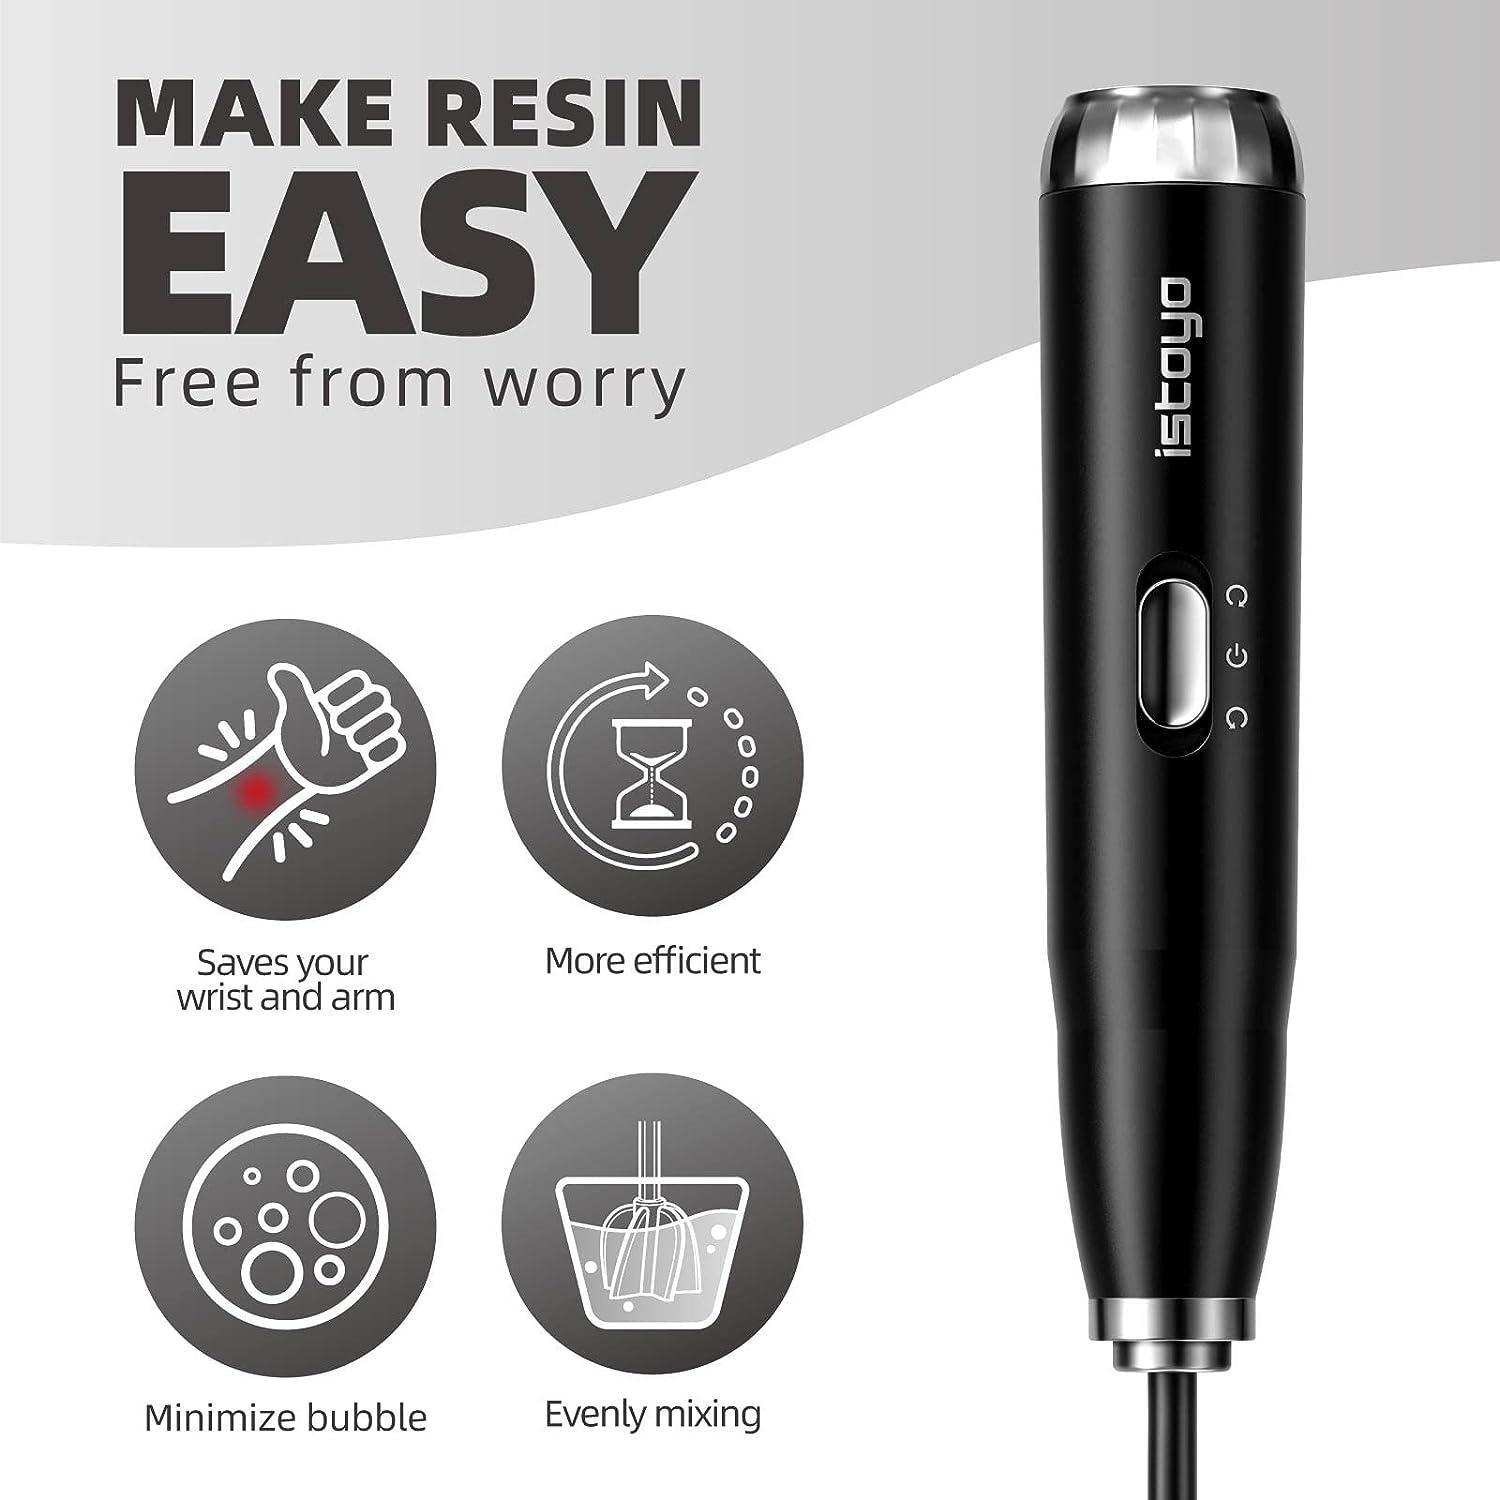 Epoxy Mixer Resin Mixer - Rechargeable Battery Electric Handheld Mixer for  Resin Accessories, Epoxy Stirrer for Resin, Silicone Resin Molds Mixing